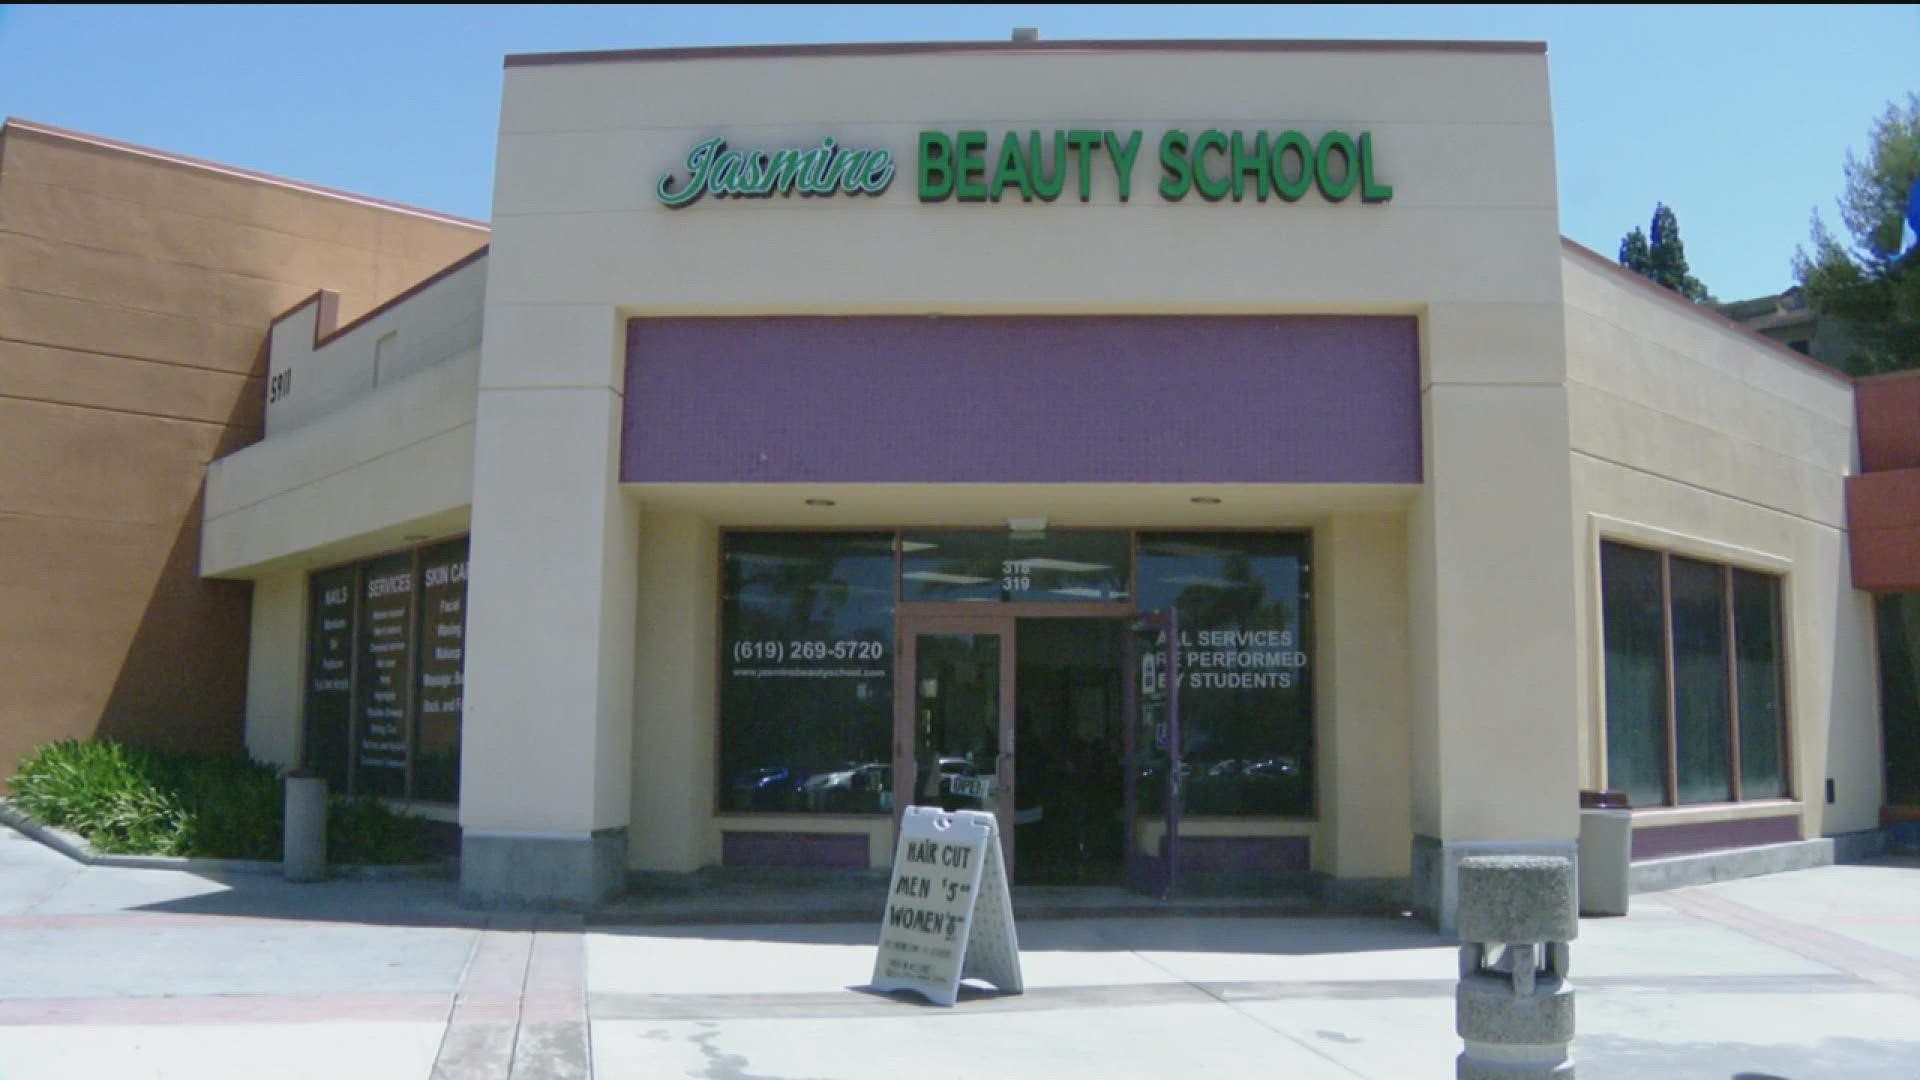 Jasmine Beauty School offers different programs at affordable prices, including barbering, manicuring and massage therapy.